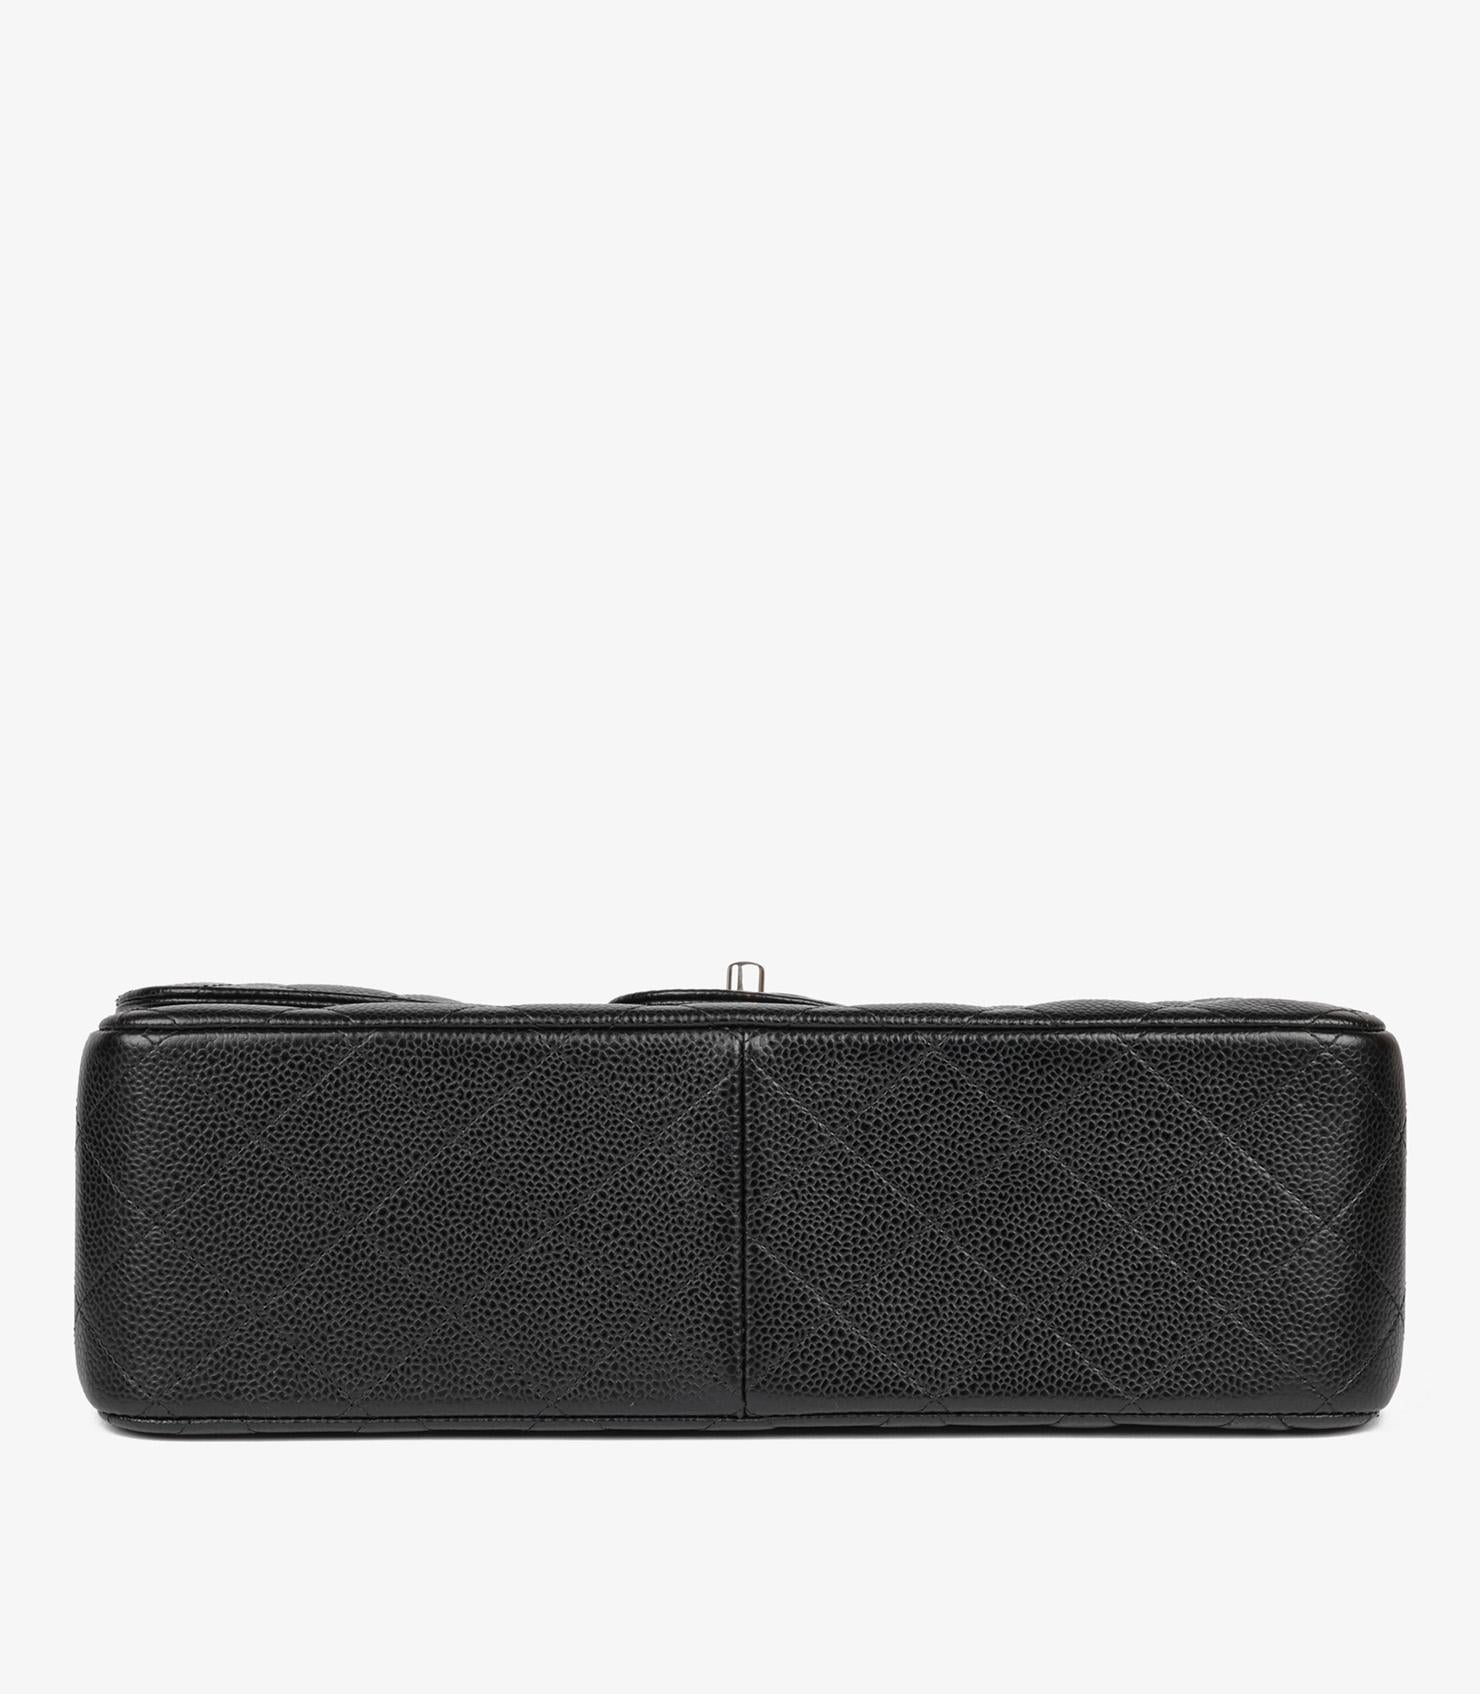 Chanel Black Caviar Leather Jumbo Classic Double Flap Bag For Sale 4